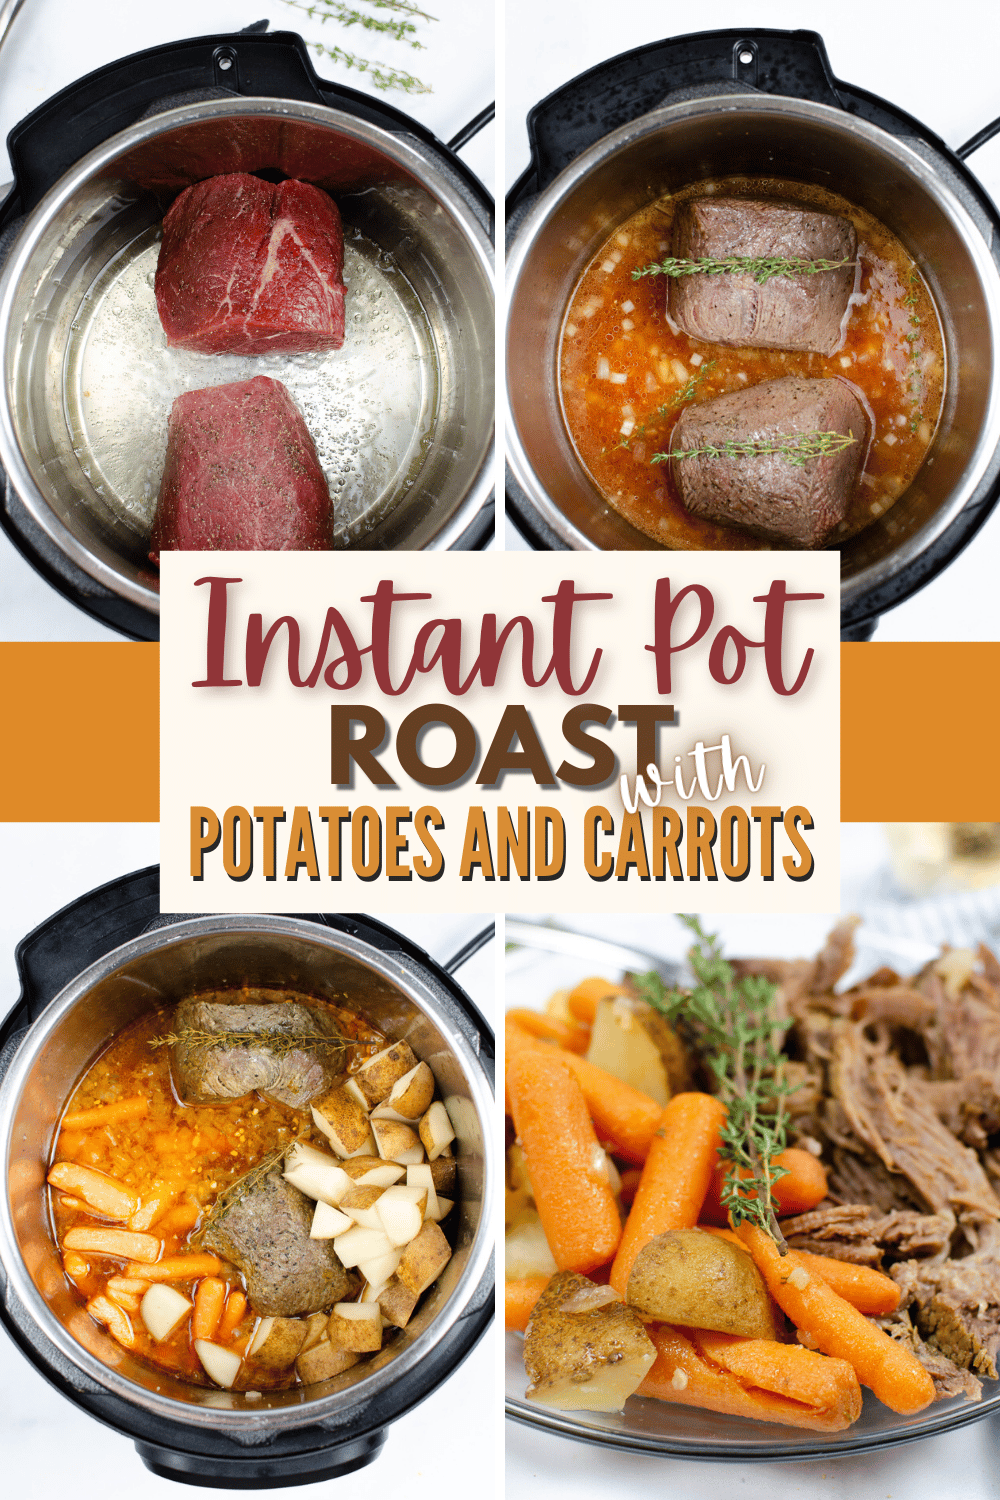 This Instant Pot Roast with Potatoes and Carrots is an easy and delicious way to get a healthy dinner on the table with minimal effort. #instantpot #instantpotroast #roastwithpotatoesandcarrots via @wondermomwannab